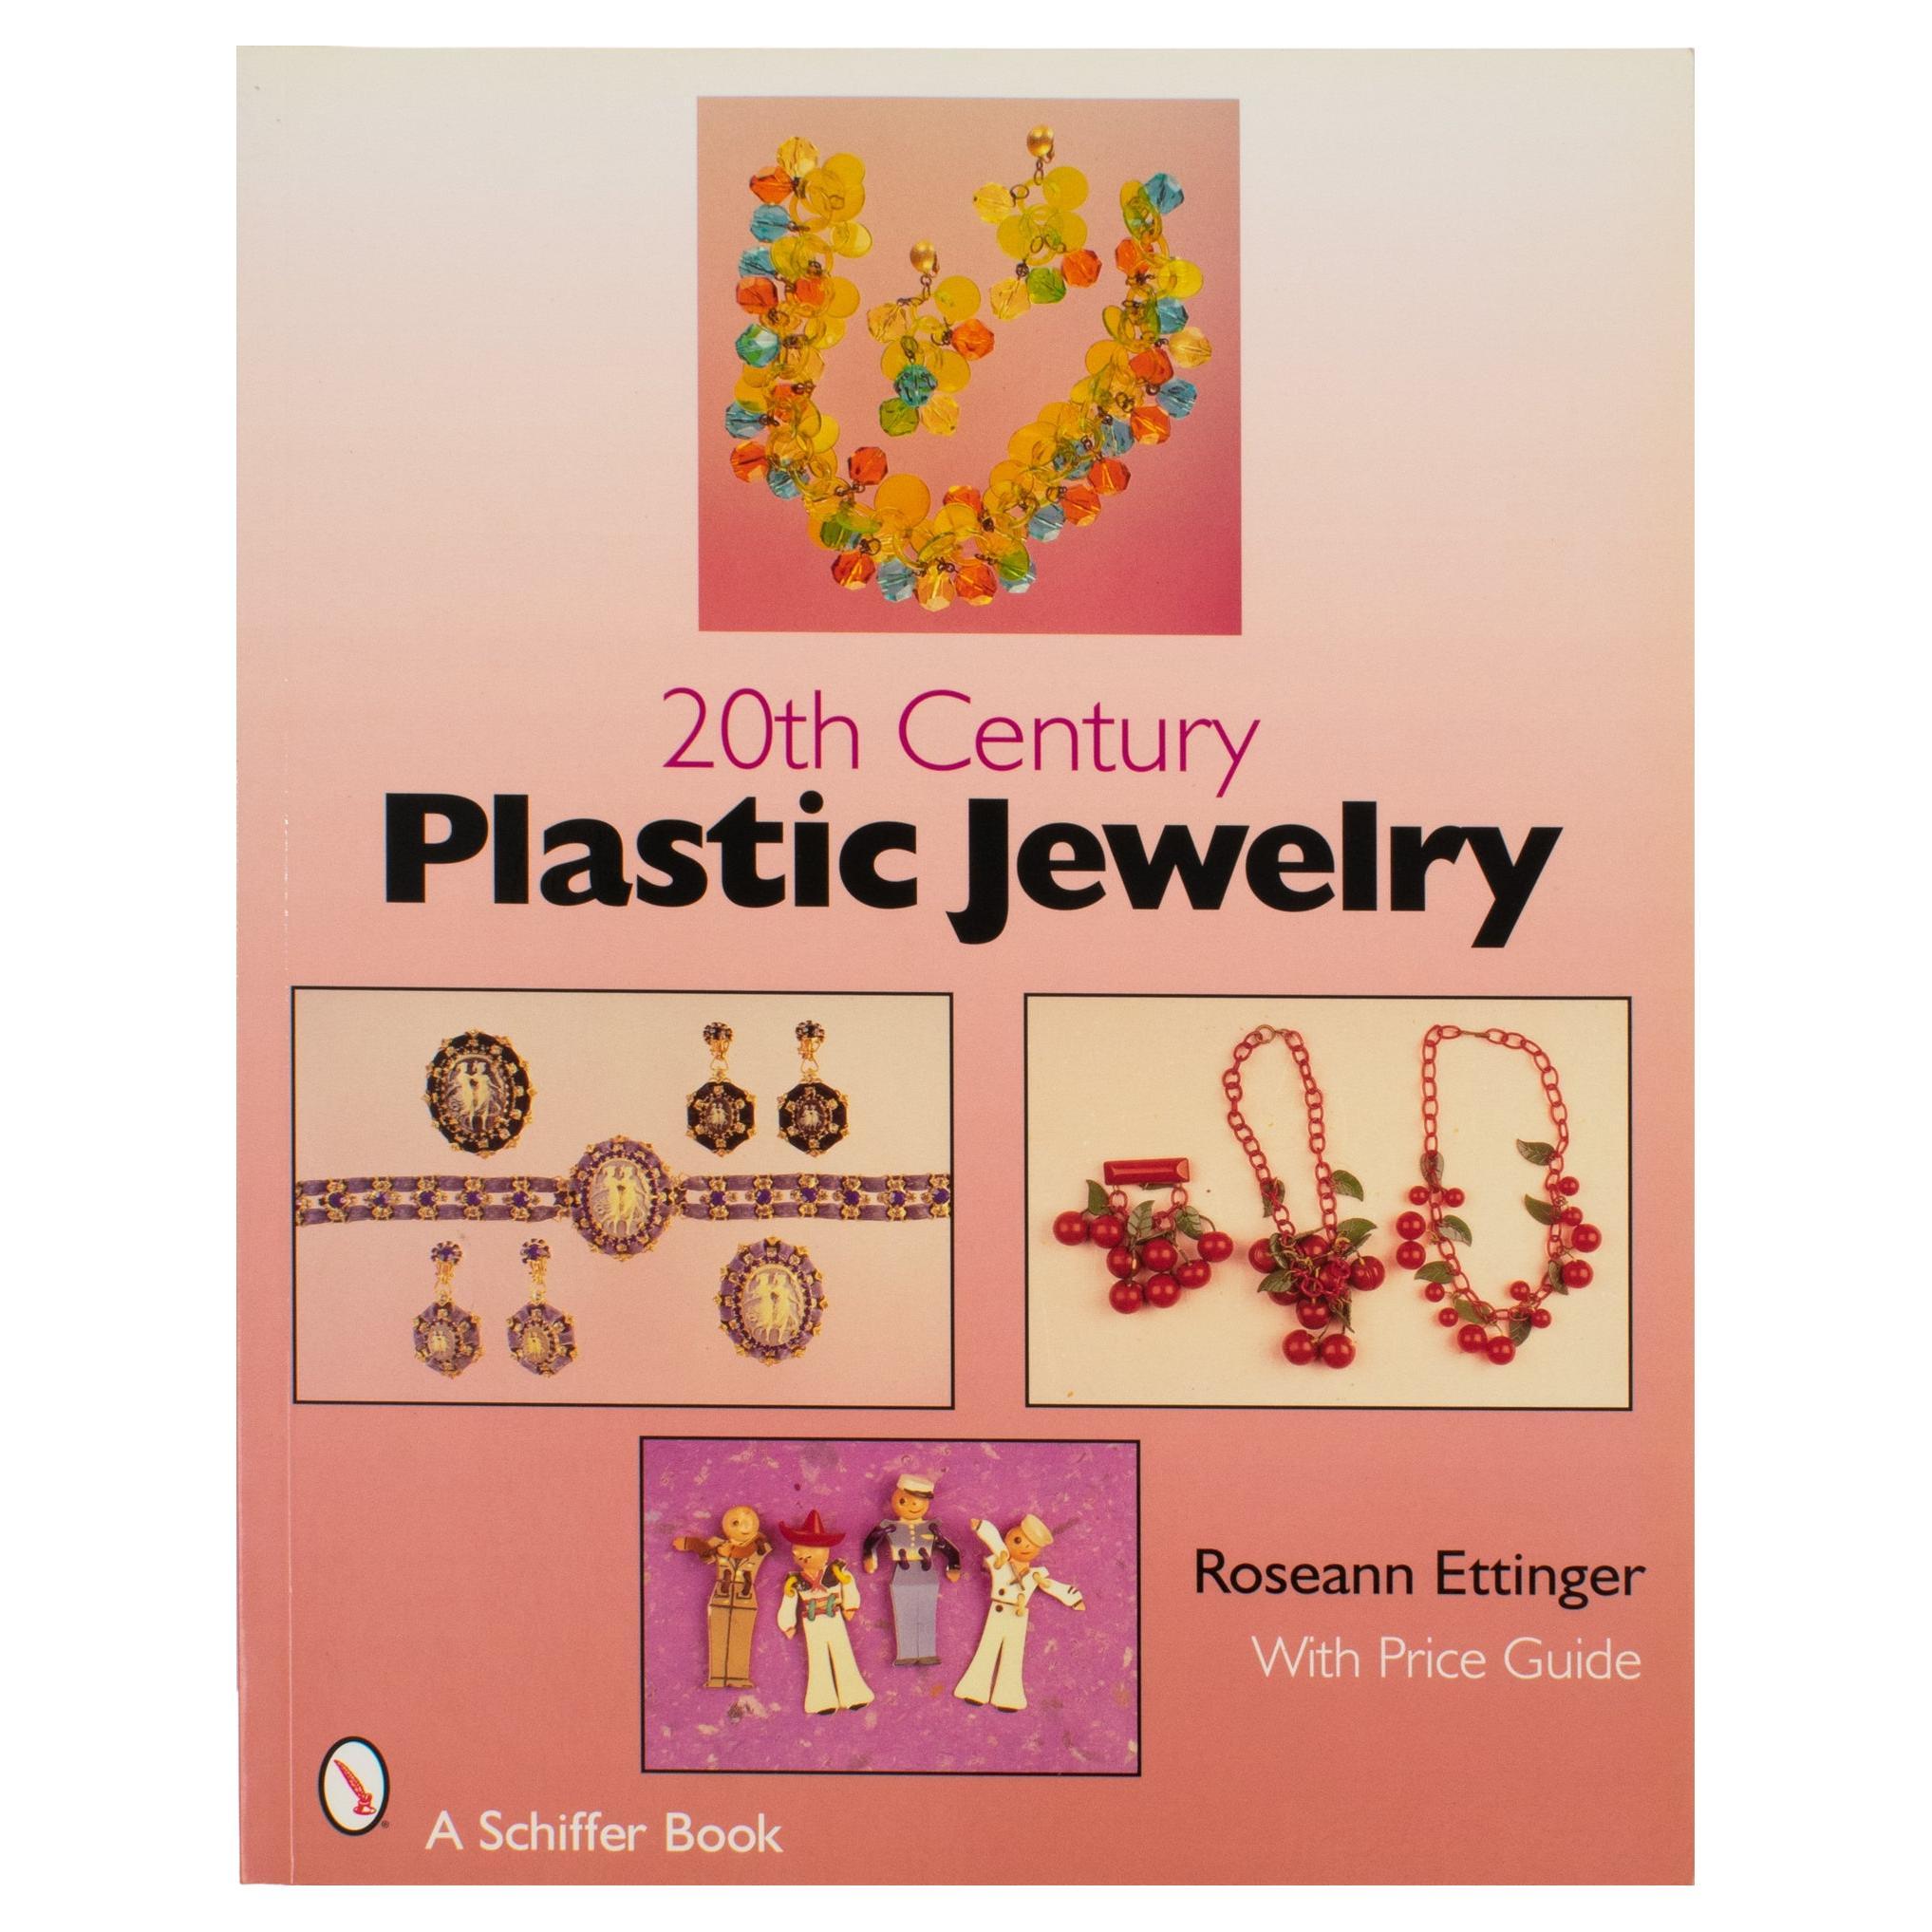 20th Century Plastic Jewelry, English Book by Roseann Ettinger, 2007 For Sale